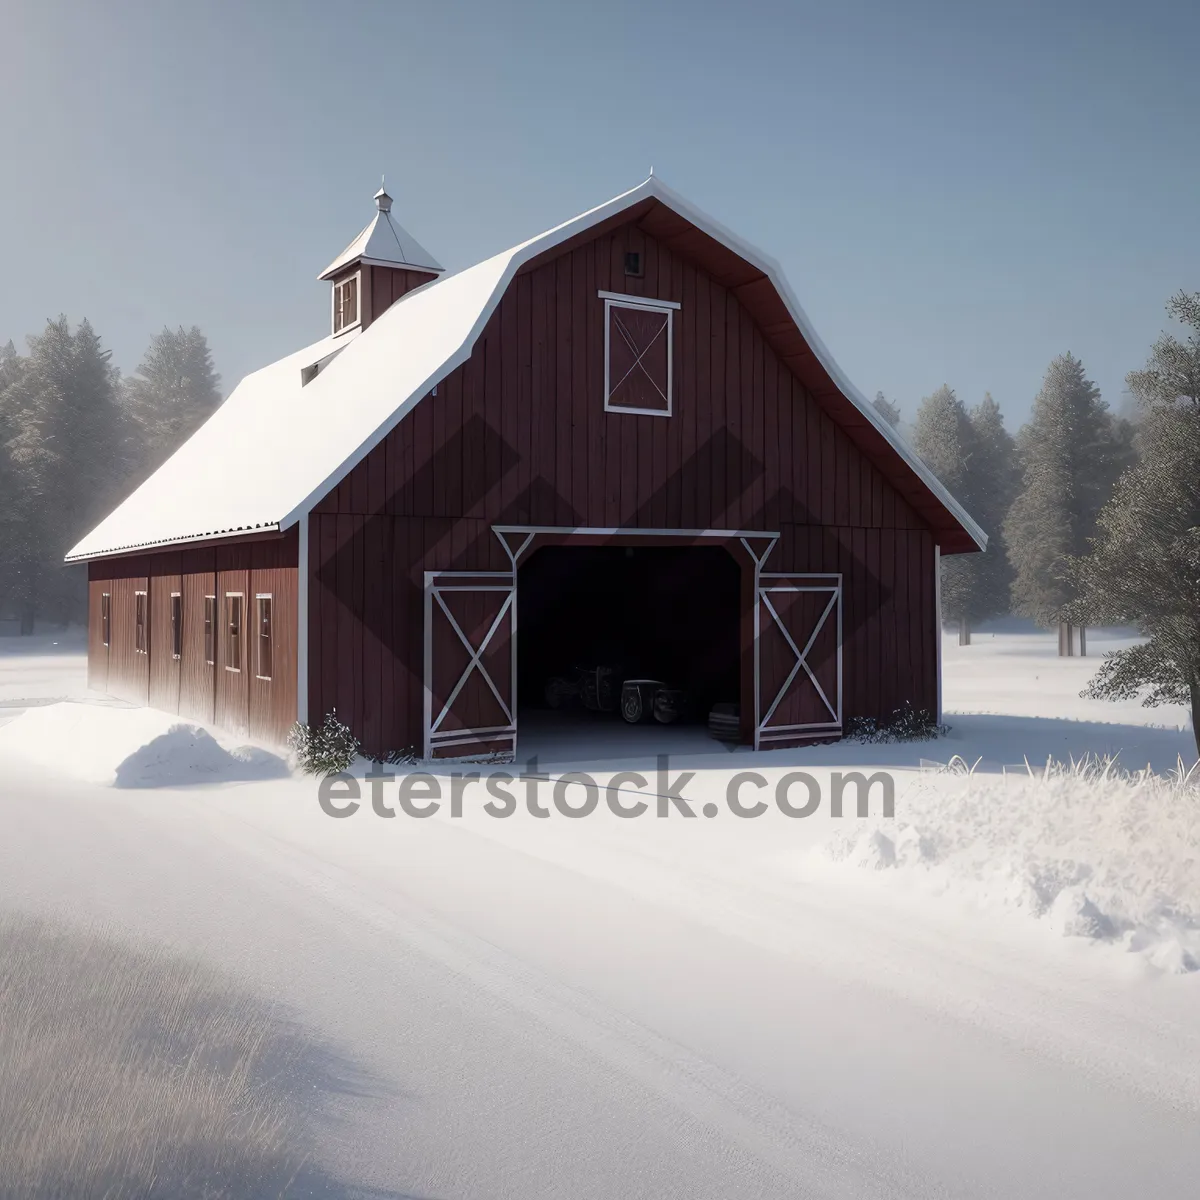 Picture of Snowy Mountain Barn